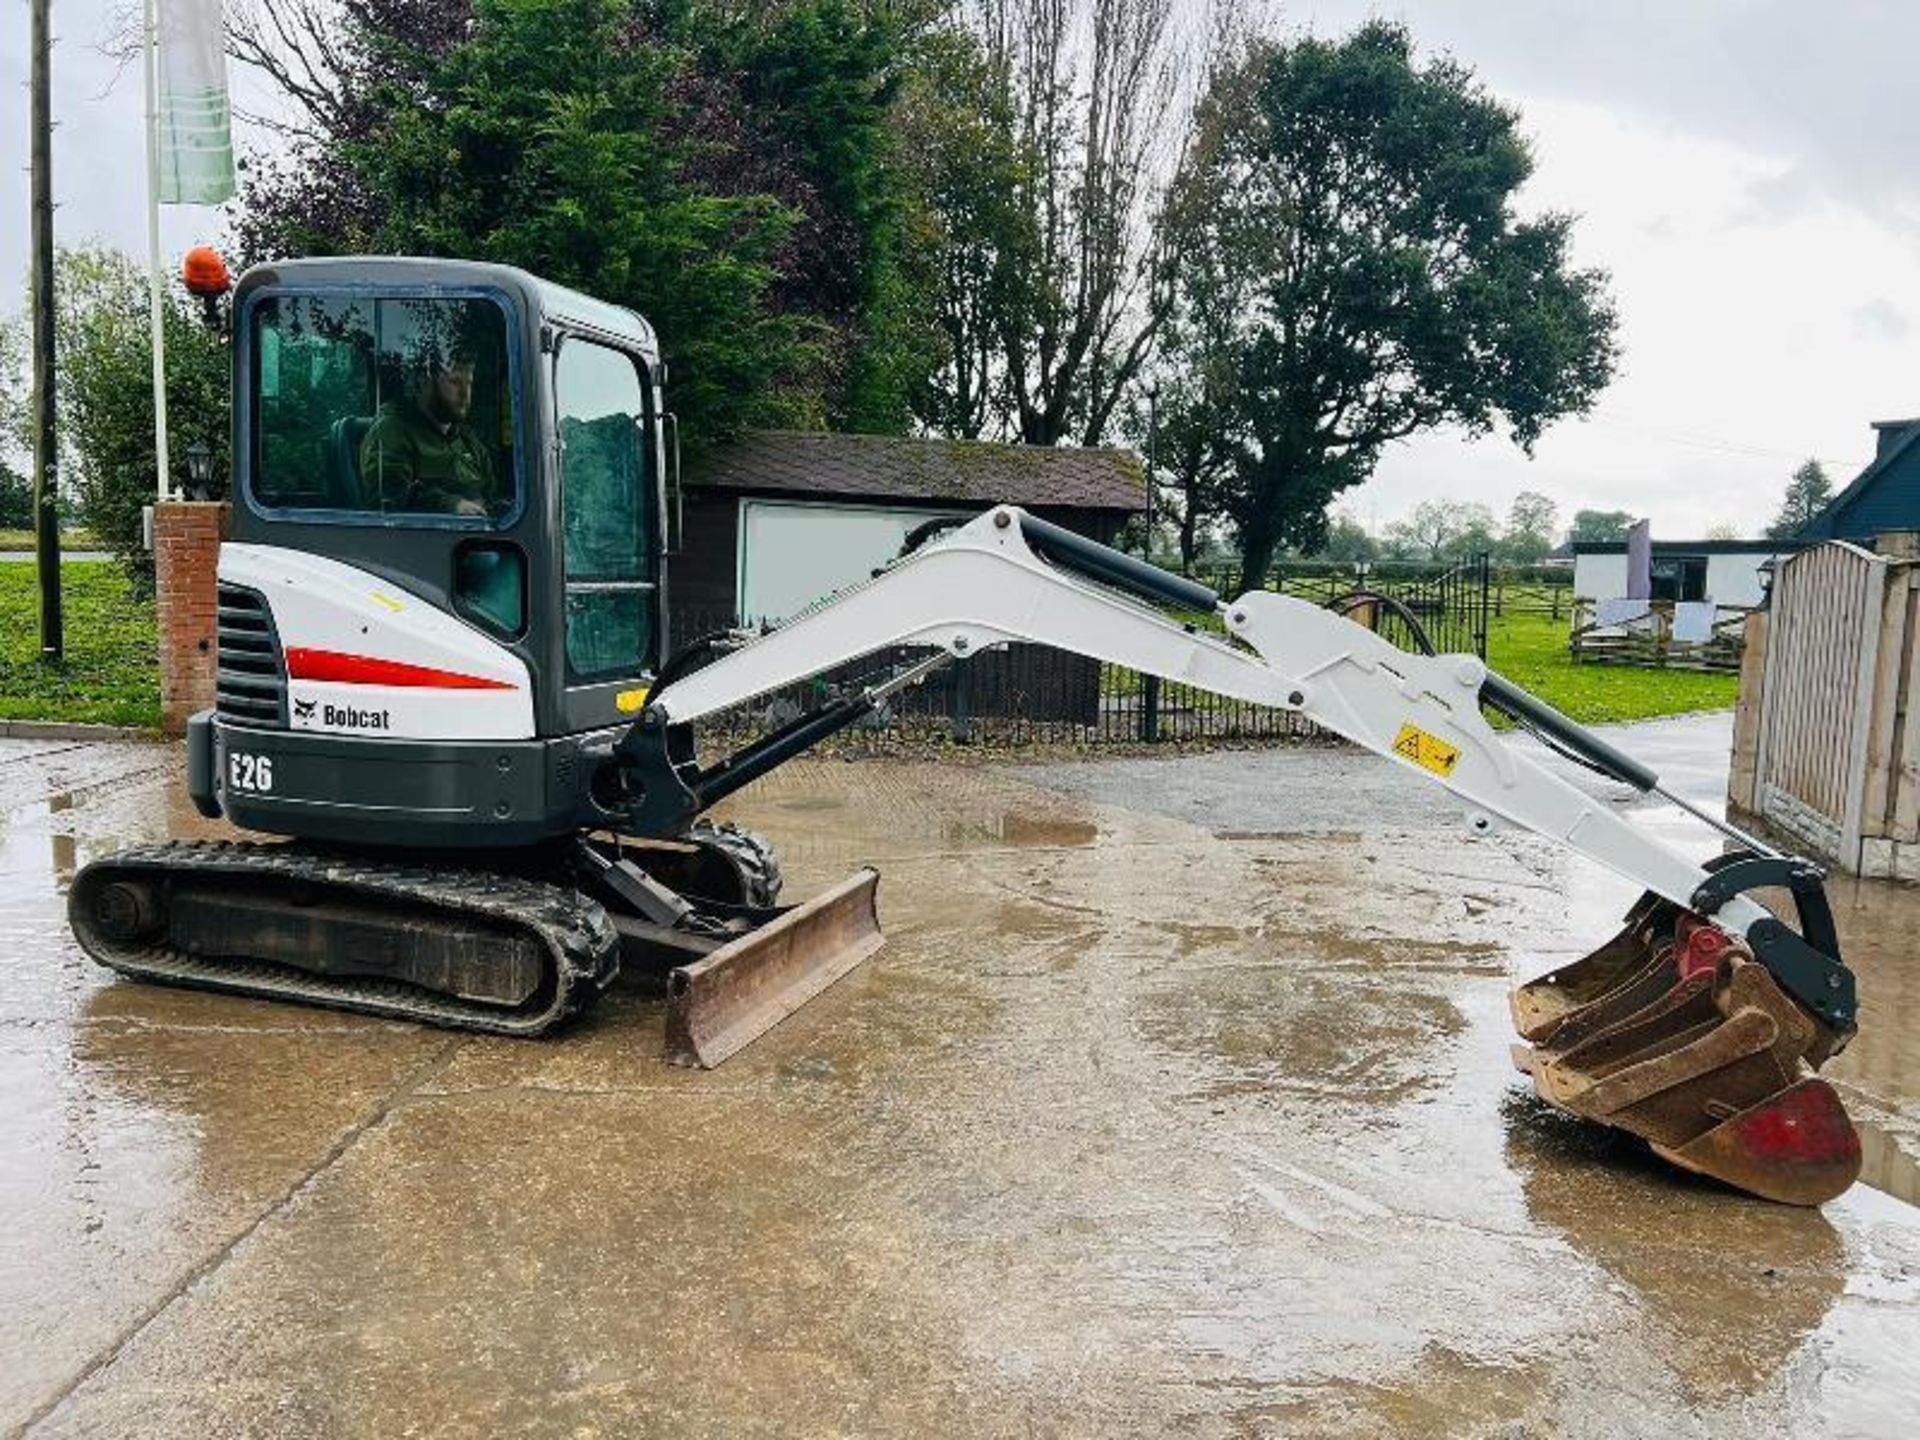 BOBCAT E26 EXCAVATOR *YEAR 2014, 3897 HOURS* C/W QUICK HITCH. - Image 13 of 15